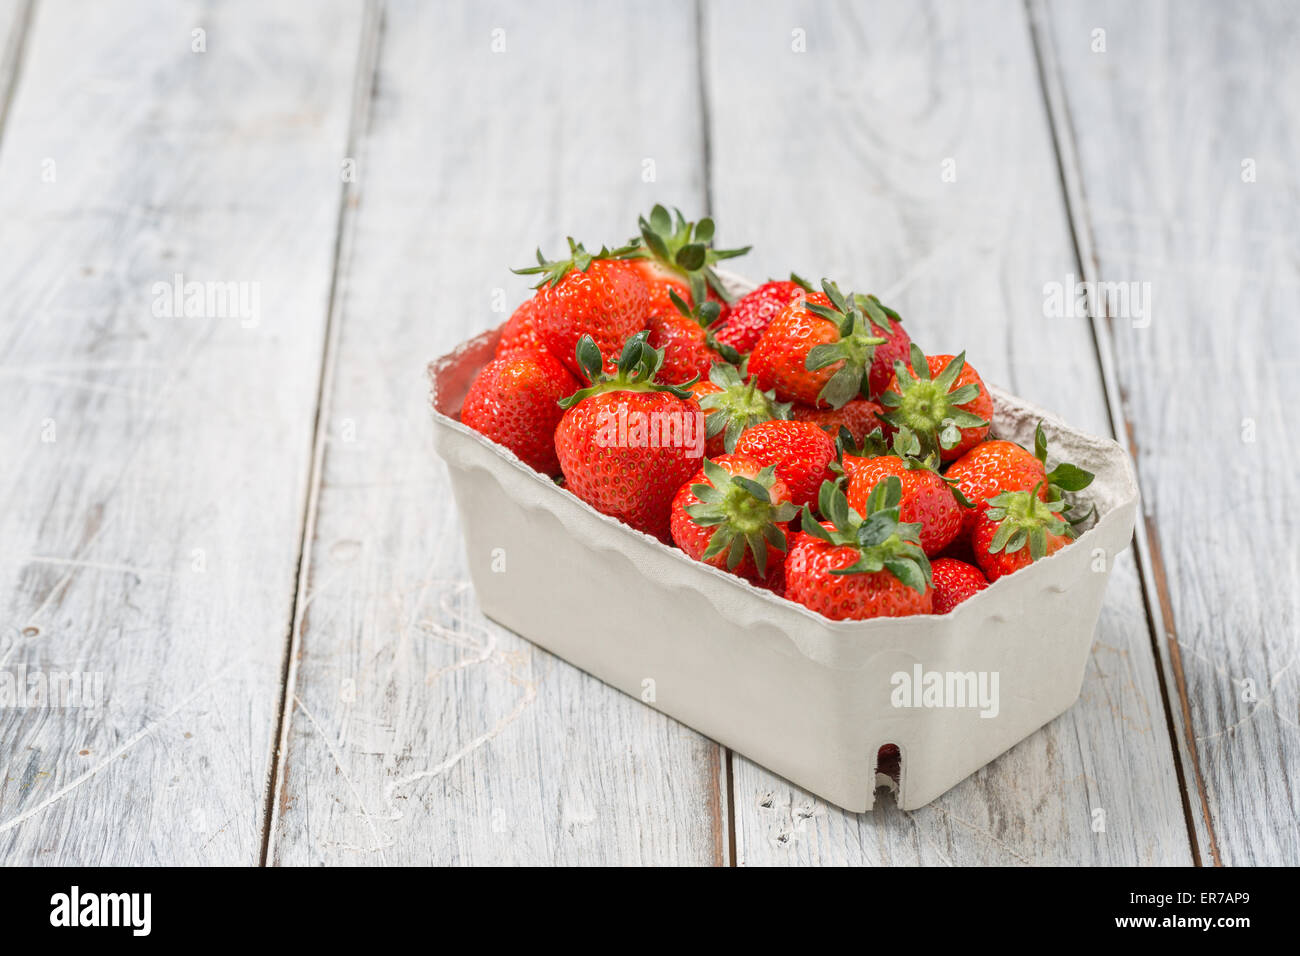 Strawberries in a paper bowl on a wooden table Stock Photo